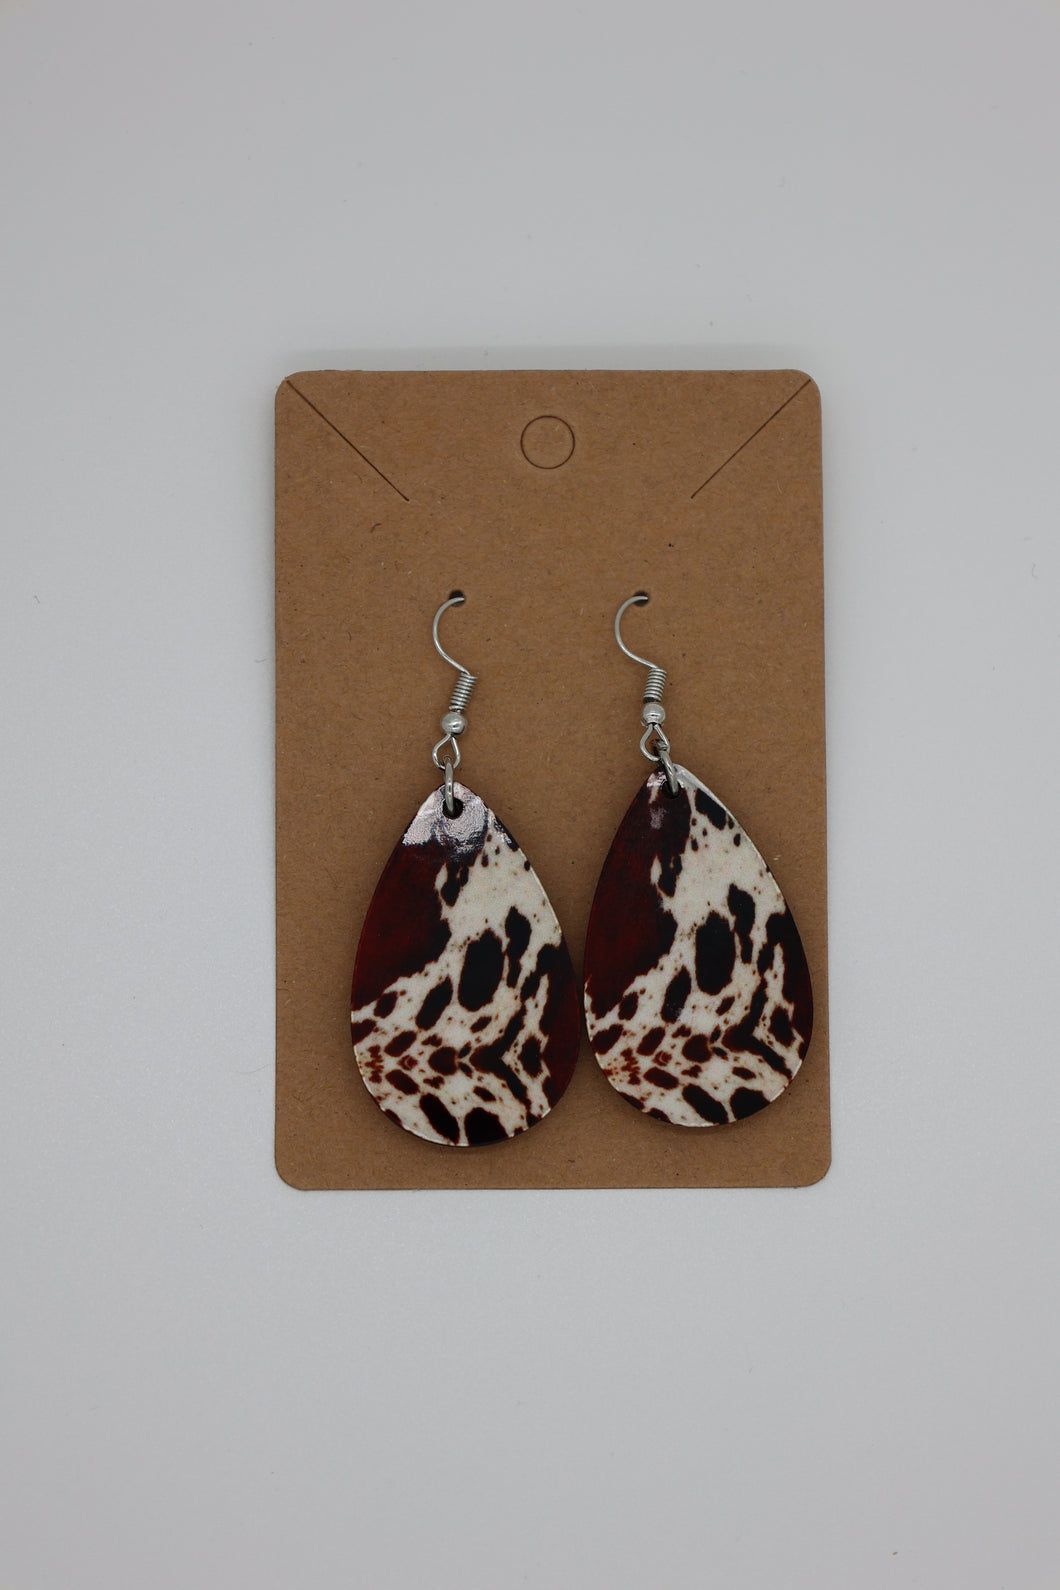 Cow Print Earrings Brown and White